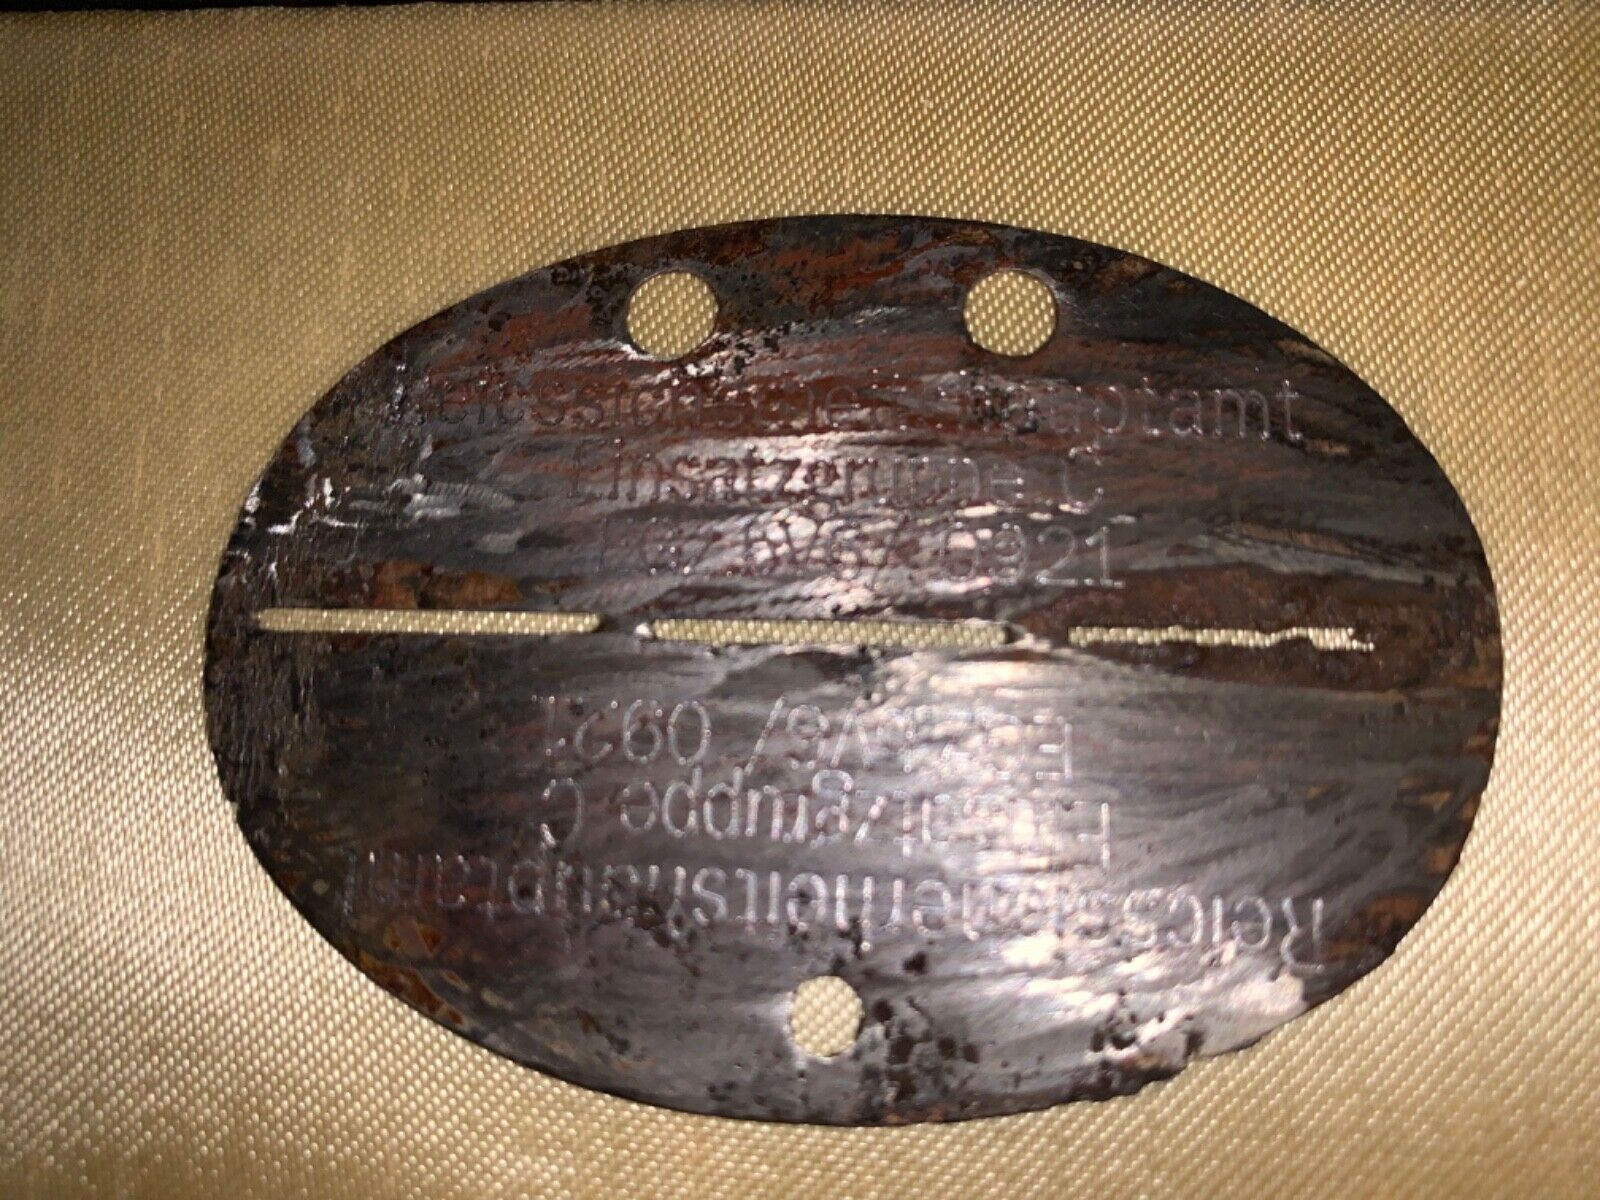 GERMAN WWII DOG TAG MILITARY 0921 HEAVILY CLEANED ORIGINAL TAG BADGE OLD RUSTY